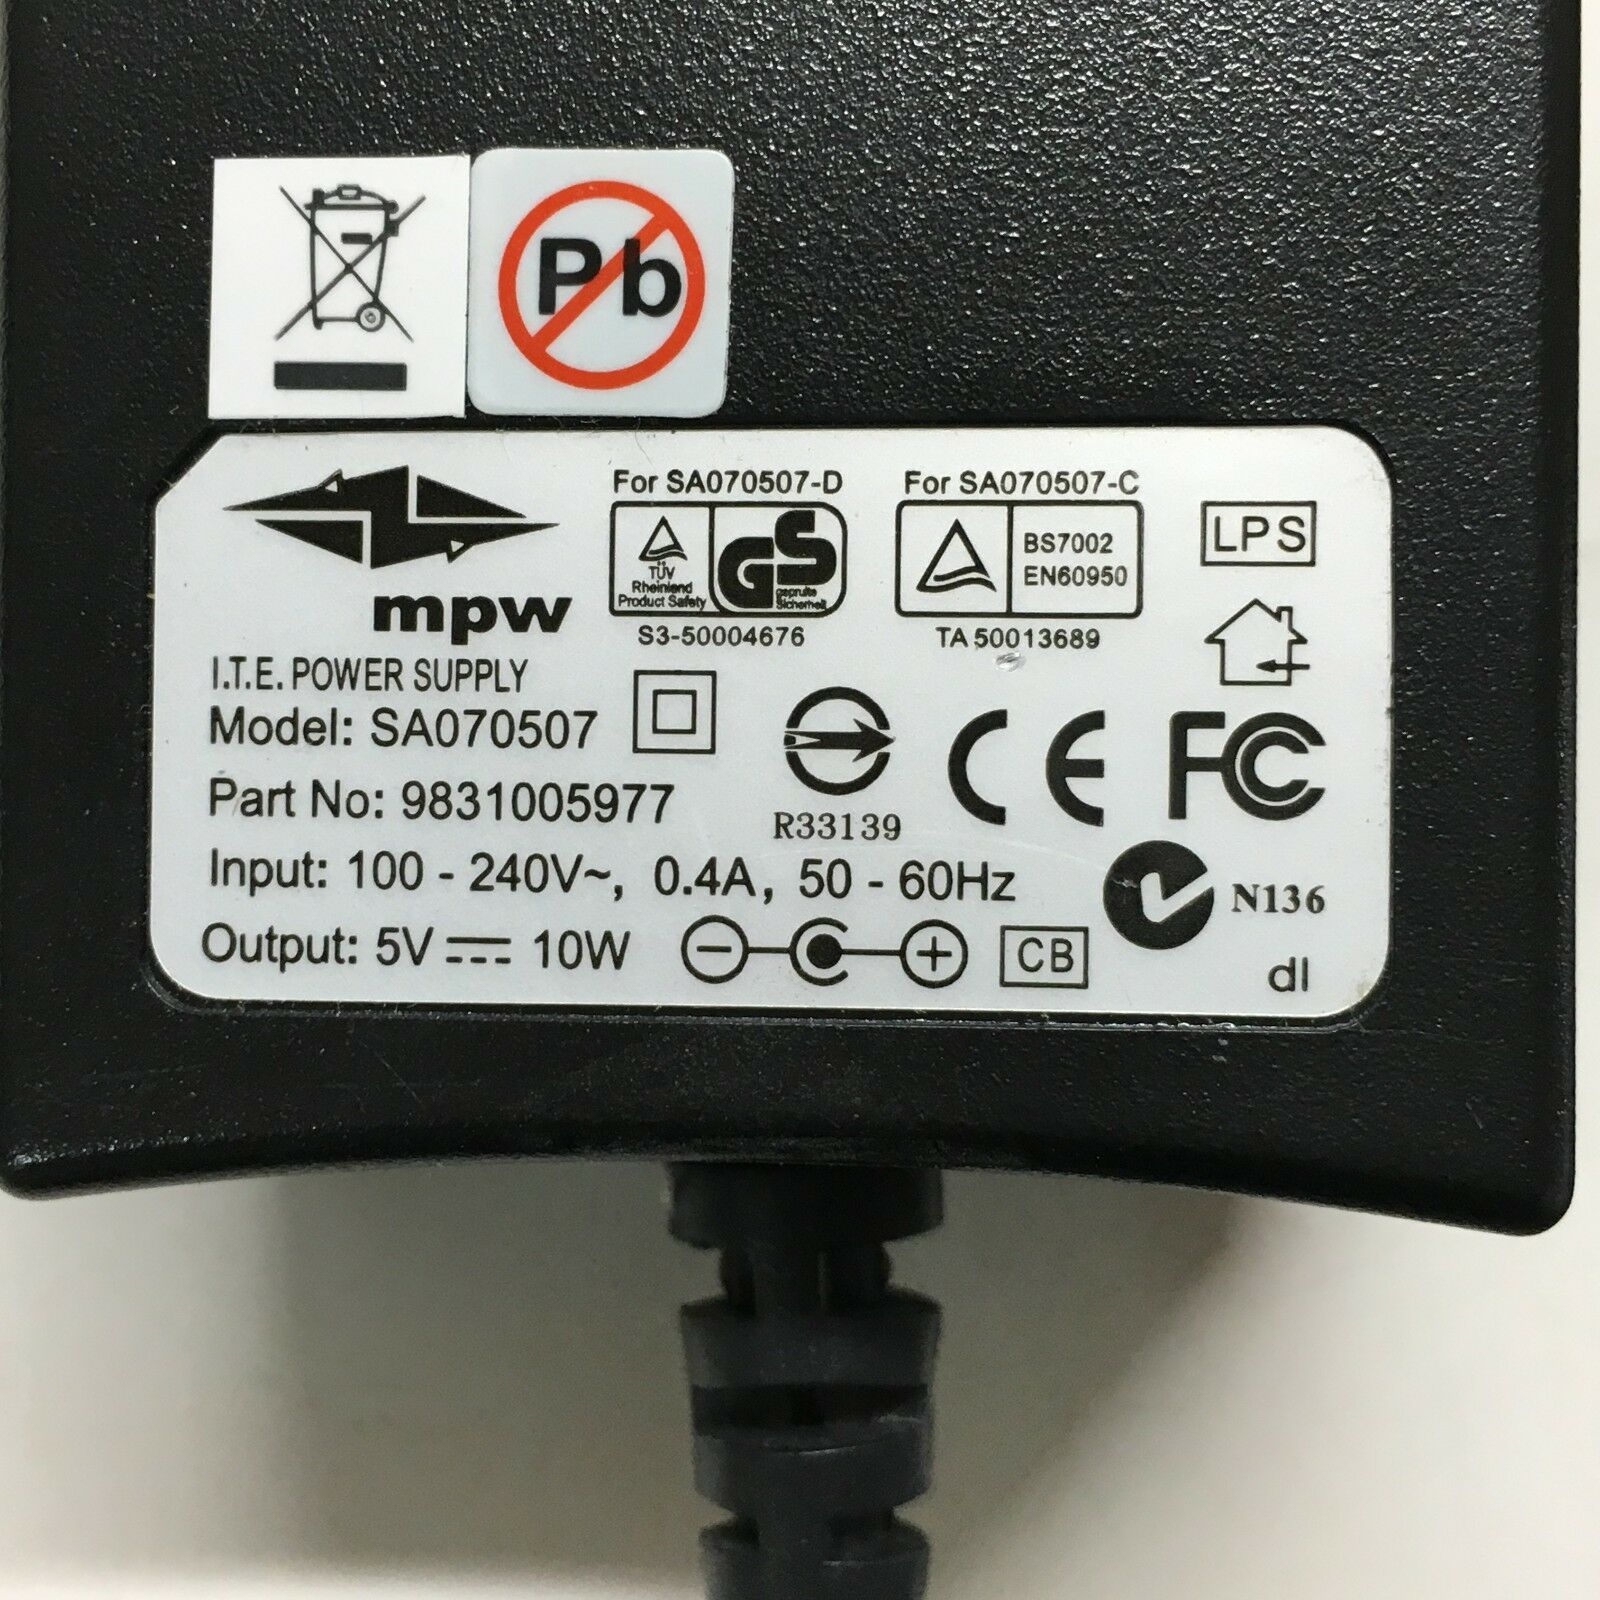 MPW 9831005977 AC Adapter Power Supply For Linksys Router SA070507 5 volt 10w part no:9831005977 Brand: MPW MPN: SY - Click Image to Close